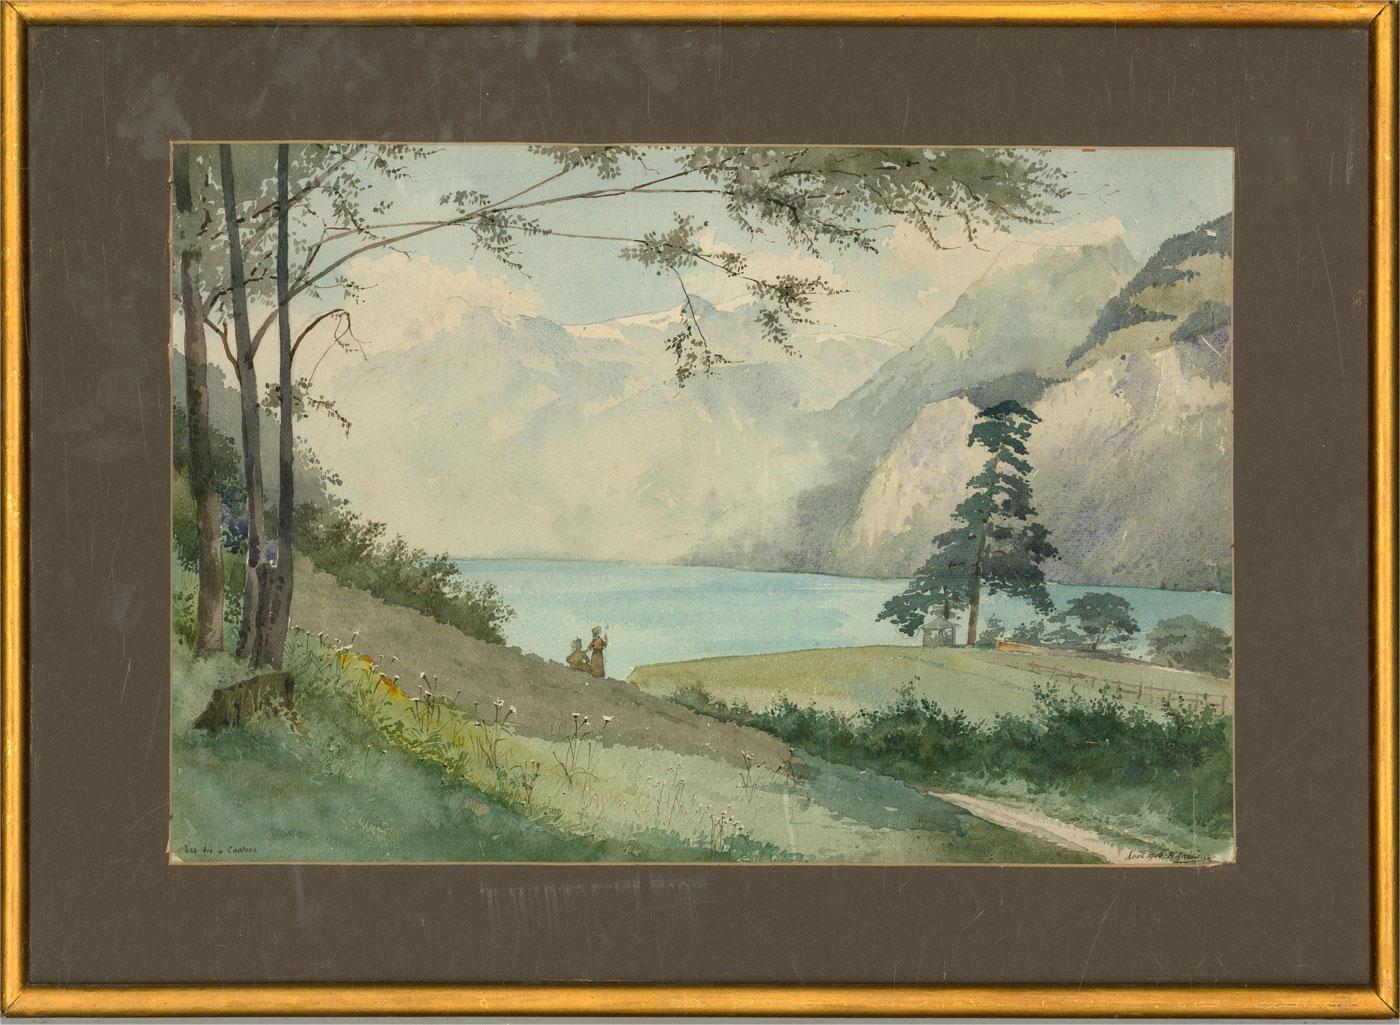 A fine and delicate watercolour painting by R. Cailleux. The scene depicts a landscape view with two figures of Lake Lucerne (Lac des Quatre Cantons), the fourth largest lake of Switzerland. Signed and dated to the lower right-hand corner. Location